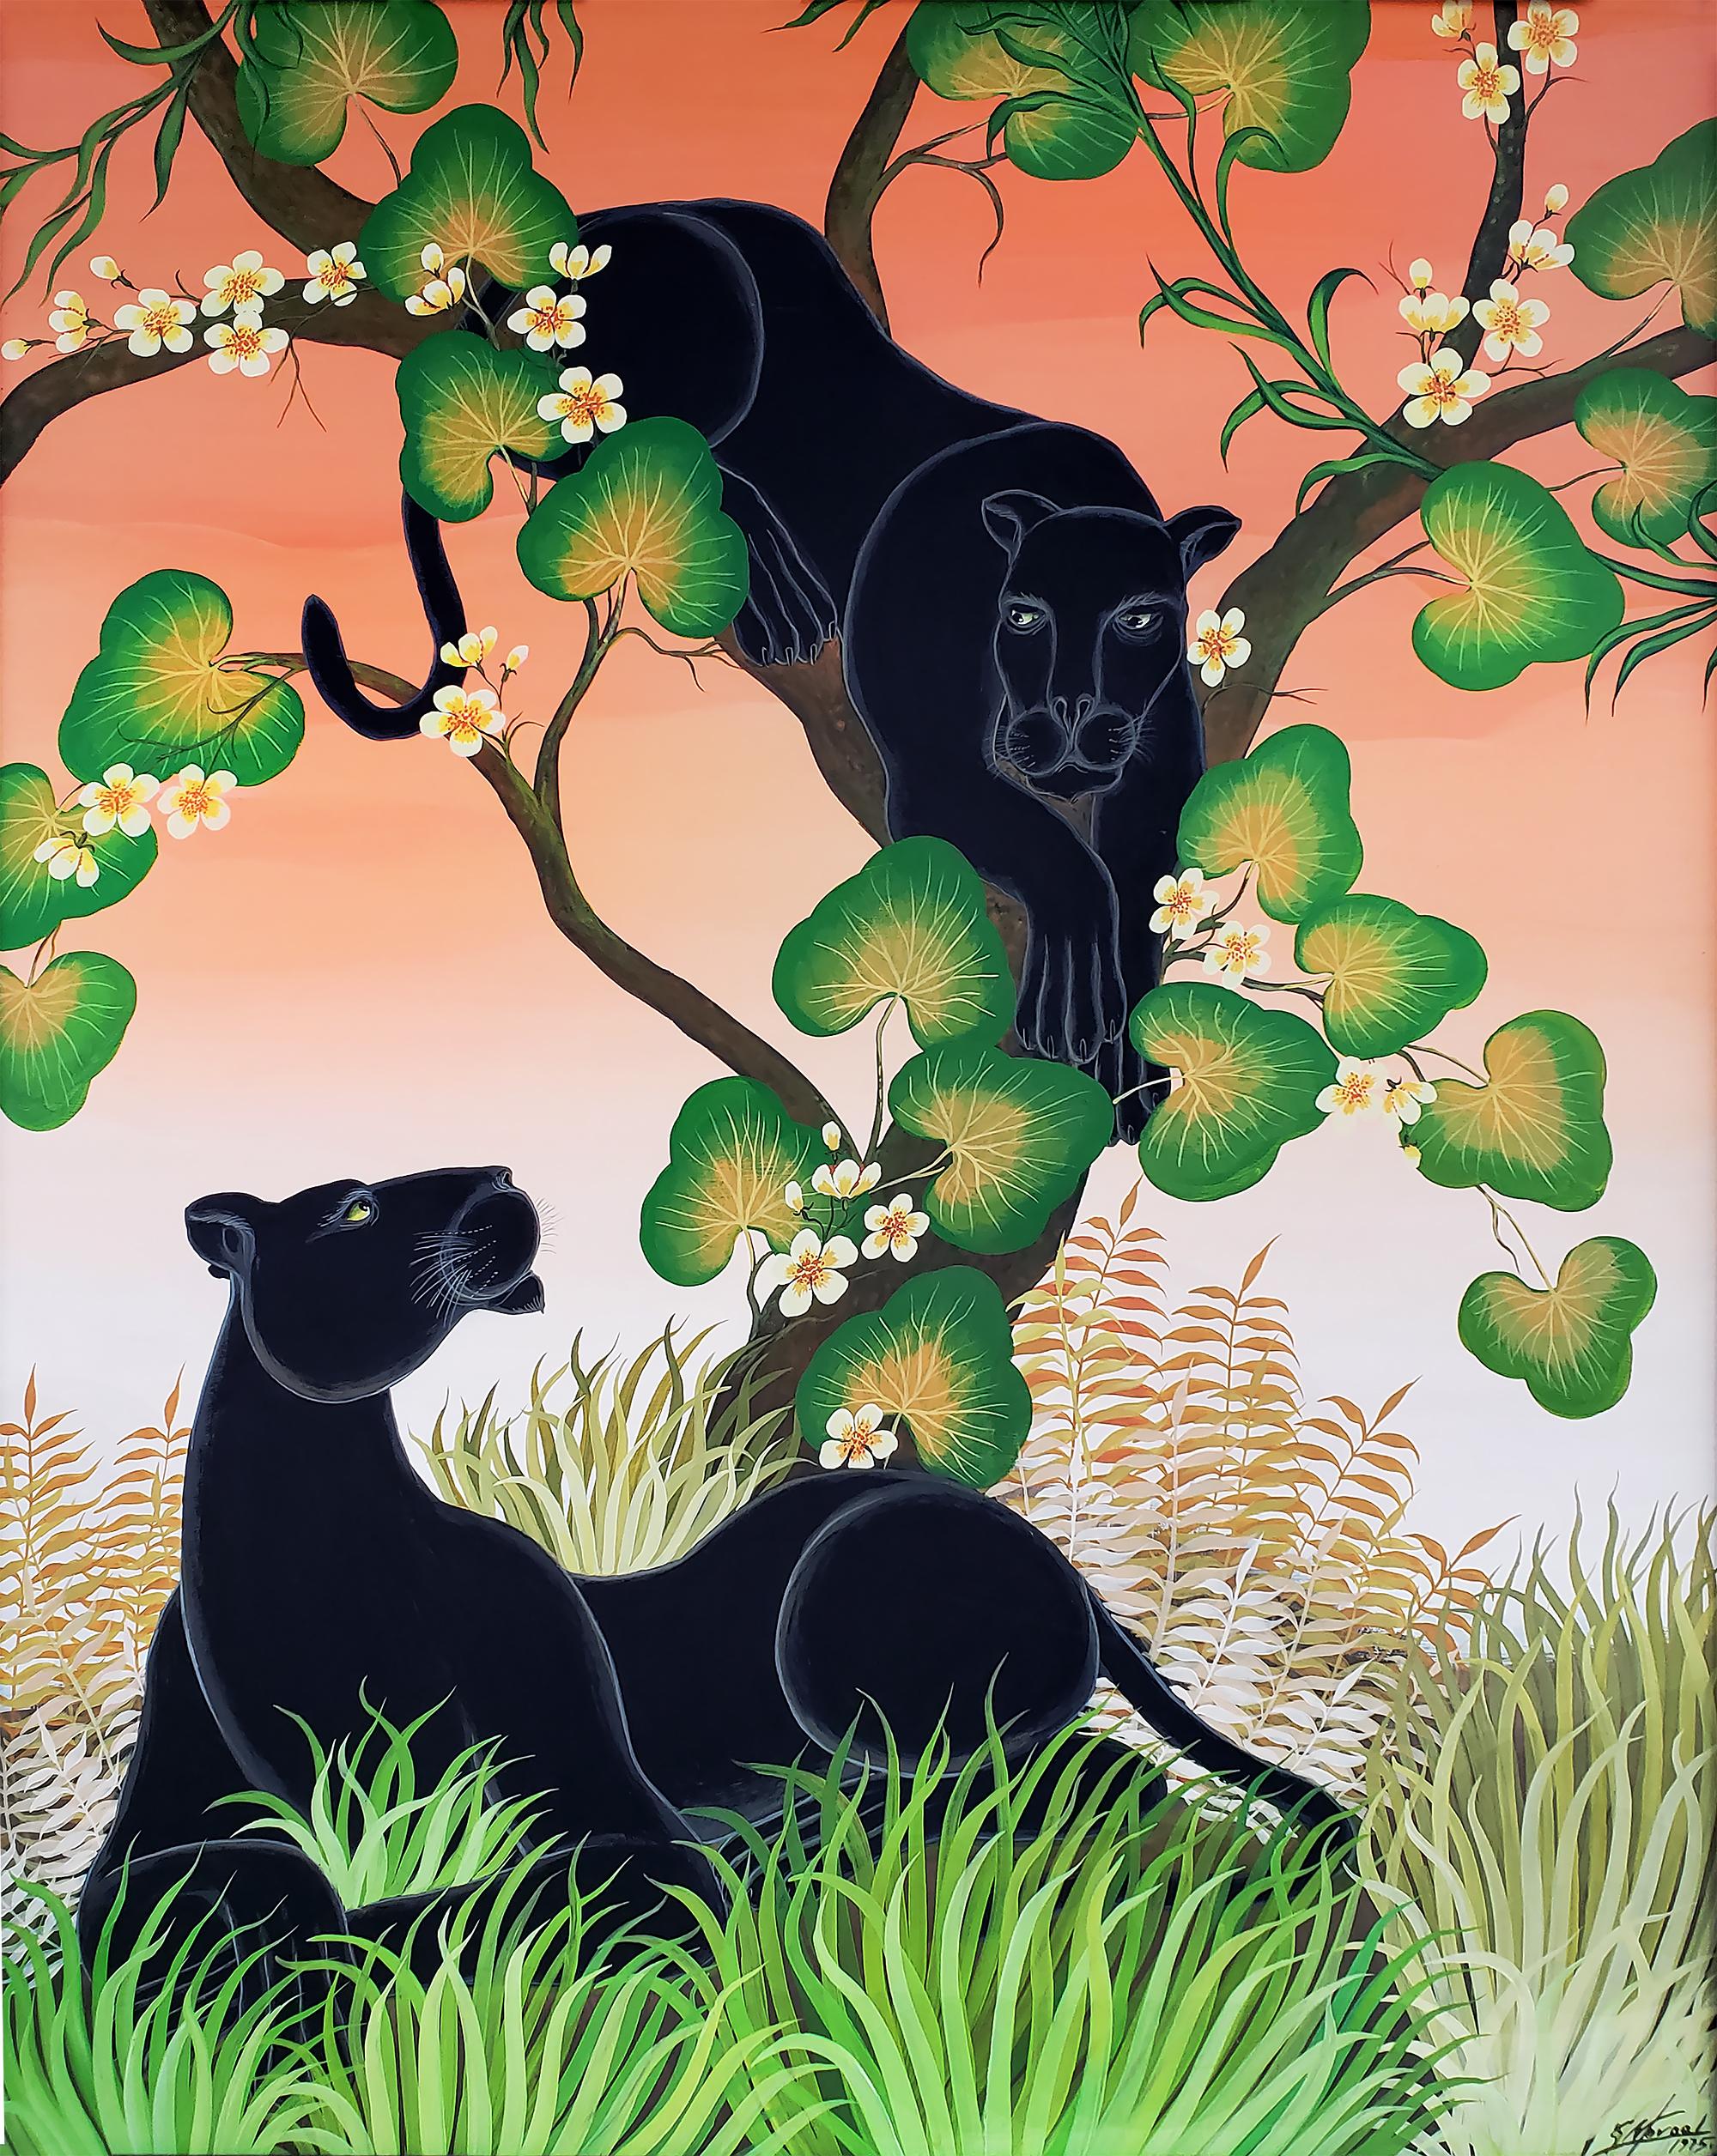 Gustavo Novoa Animal Painting - Black Panthers in a tree with a peach sky - Black Cats in Henri Maik Style